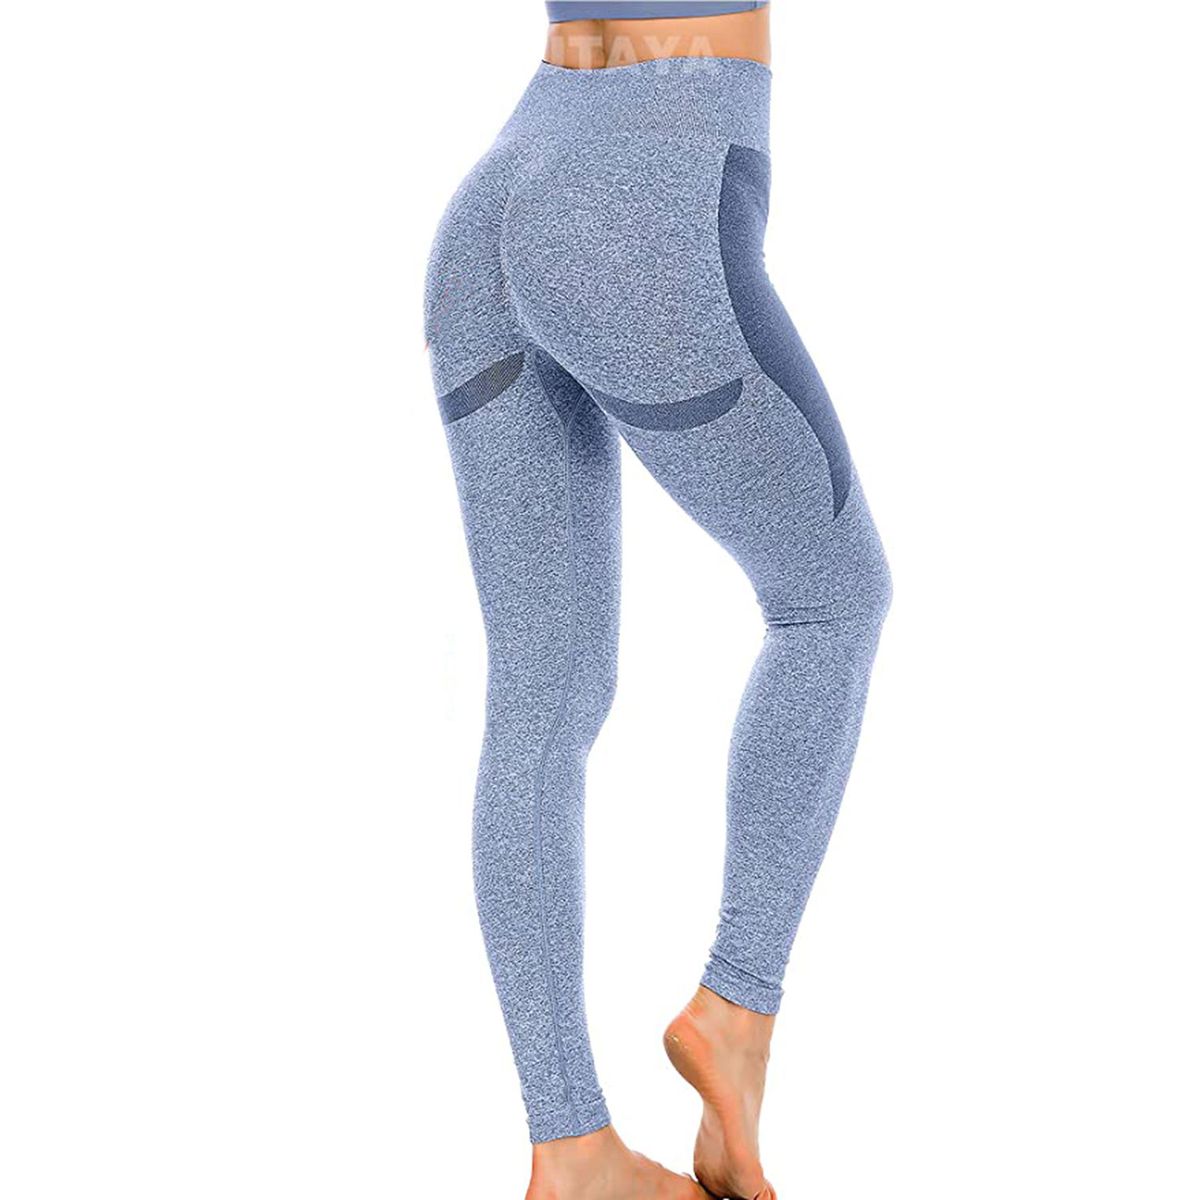 Best Scrunch Leggings for Bum Shaping in 2021, According to Reviews ...